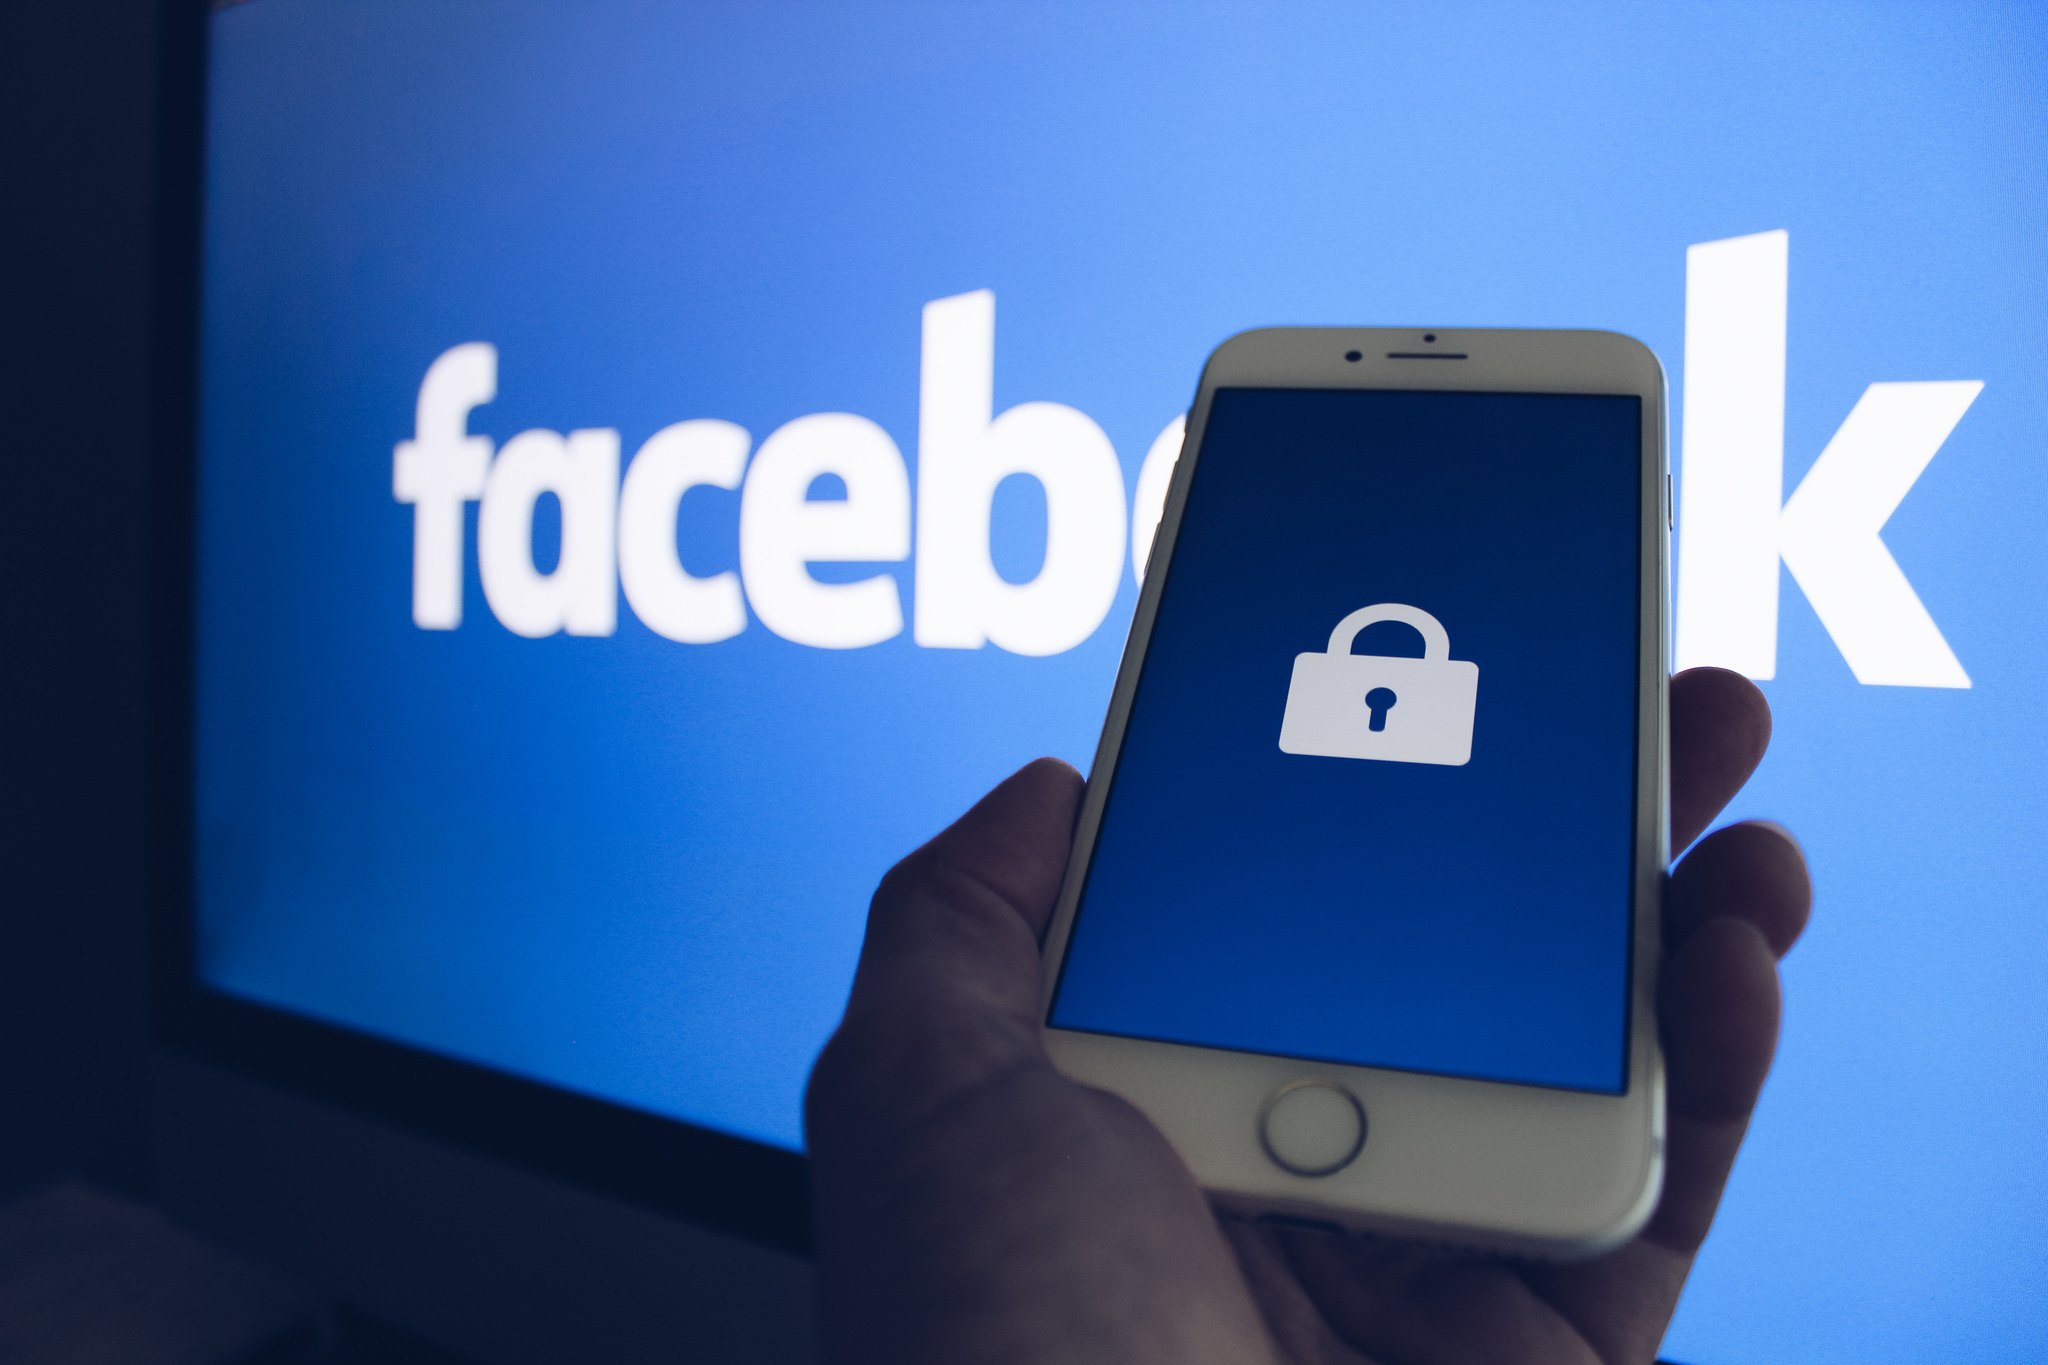 Facebook Admits To Uploading 1.5 Million Users' Contacts Without Consent